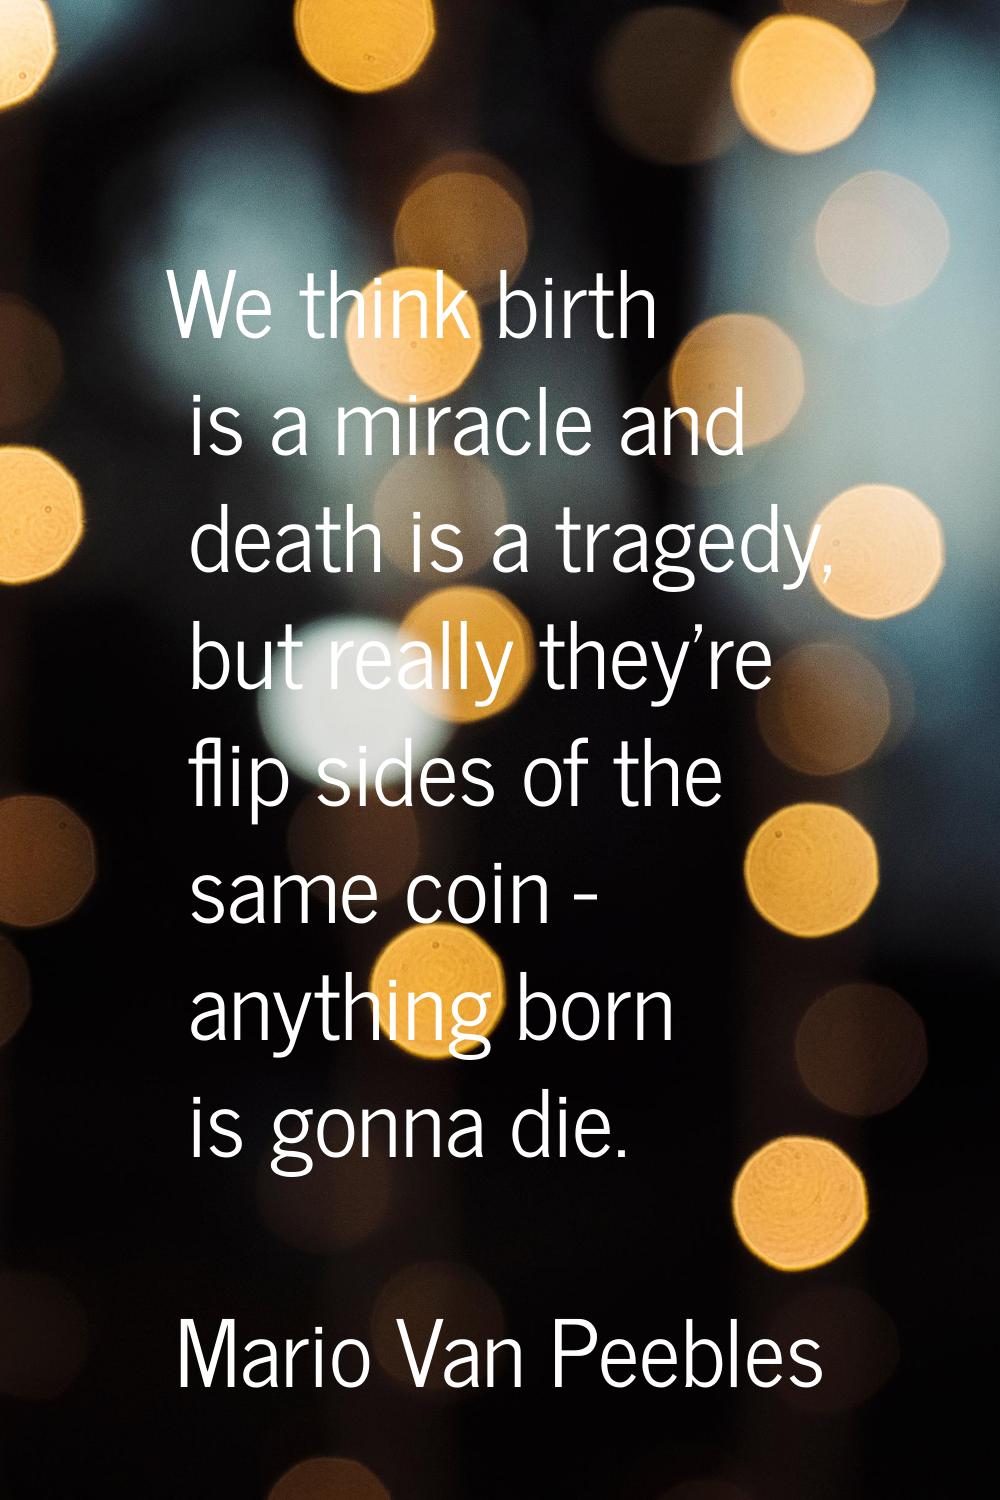 We think birth is a miracle and death is a tragedy, but really they're flip sides of the same coin 